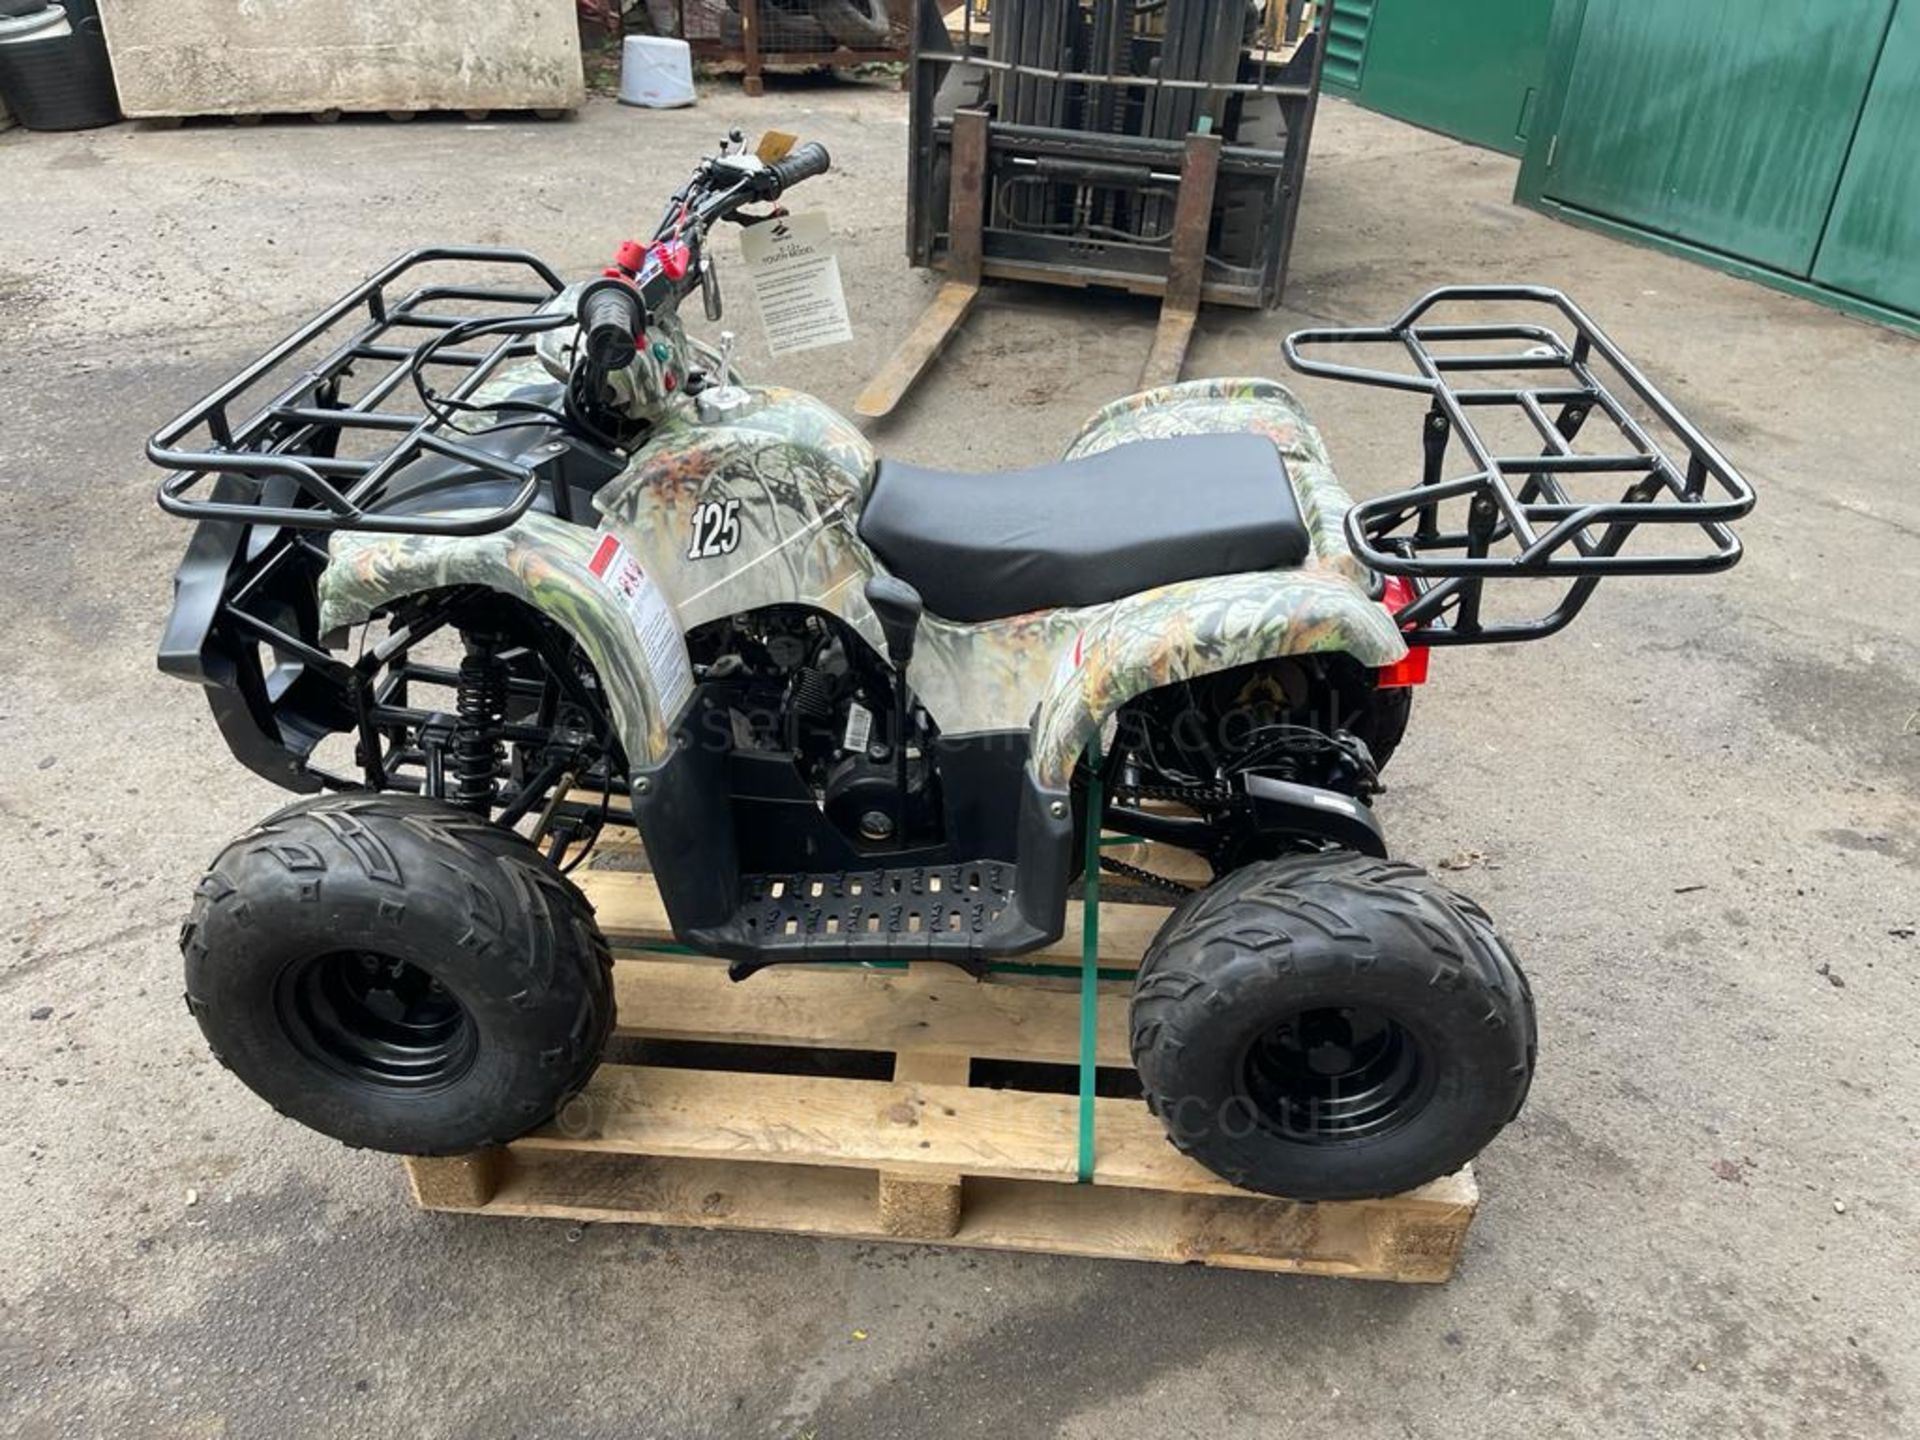 BRAND NEW 125cc QUAD BIKE, 2016, HAS BEEN TAKEN OUT OF THE BOX FOR PDI AND TESTING *NO VAT*